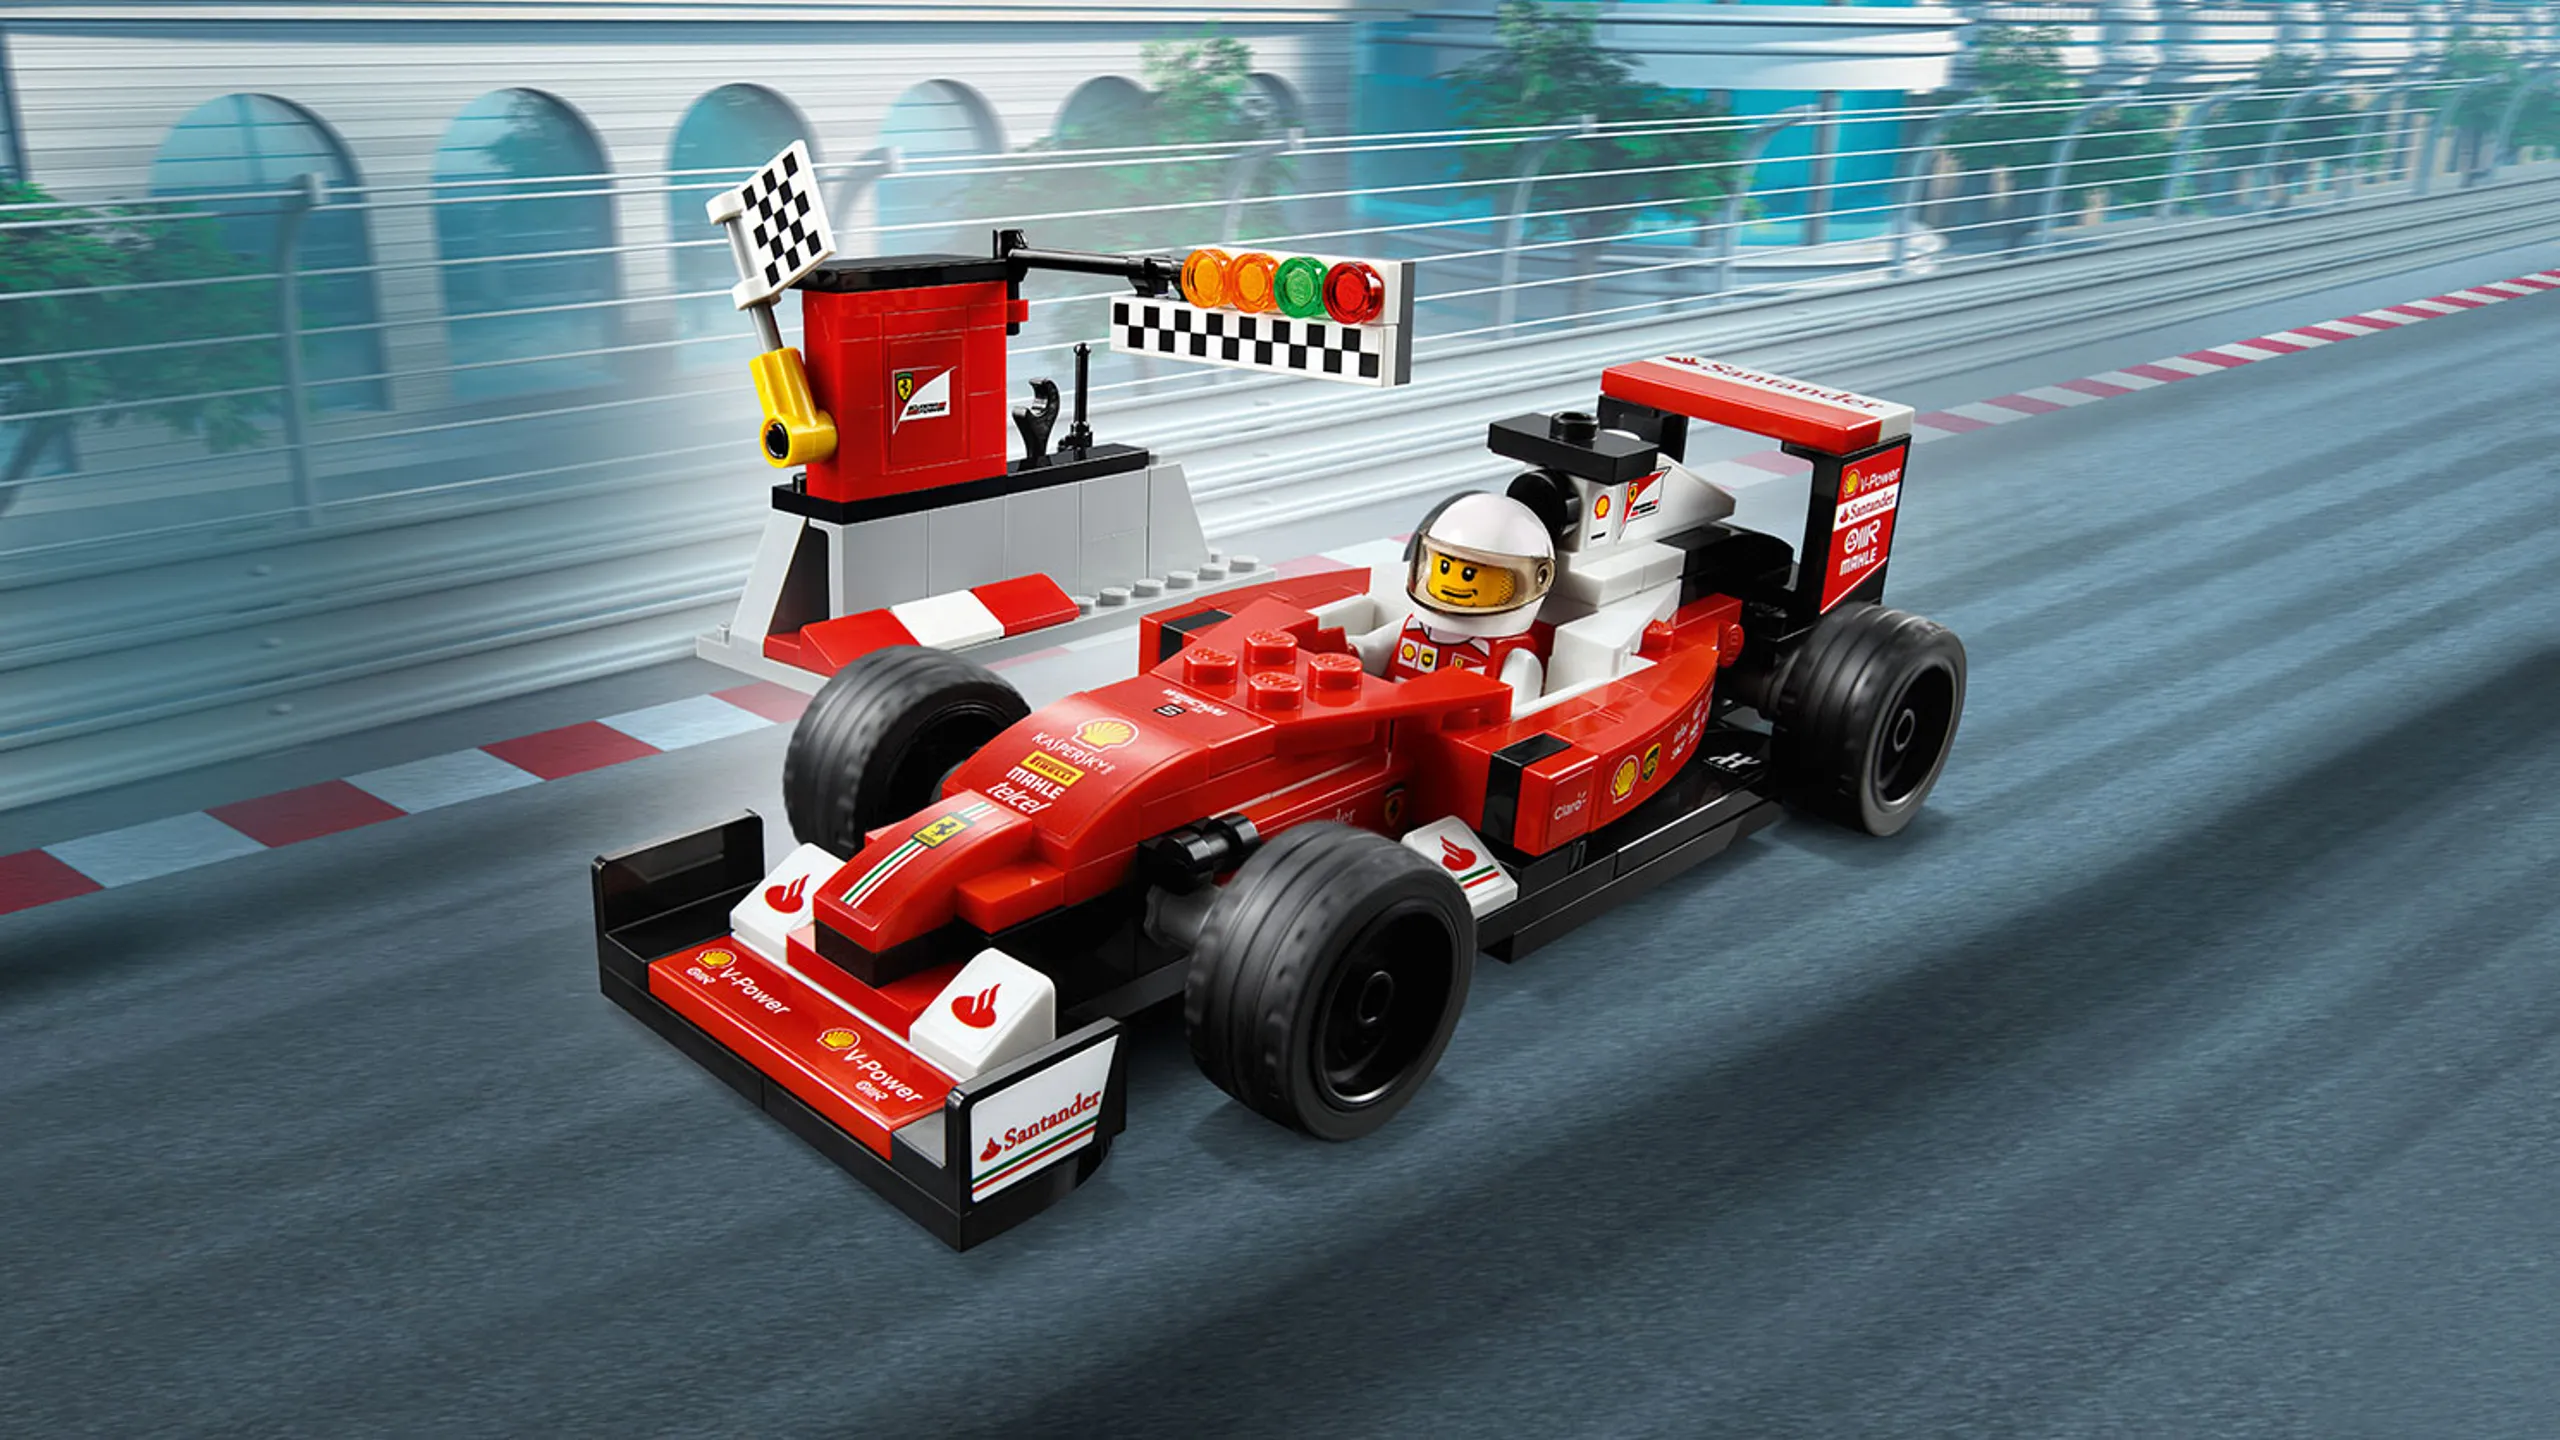 LEGO Speed Champions - 75879 Scuderia Ferrari SF16-H - Race past the pit stop with the fast Ferrari, check the race data on the monitor at the pit wall and race to be first past the checkered flag.